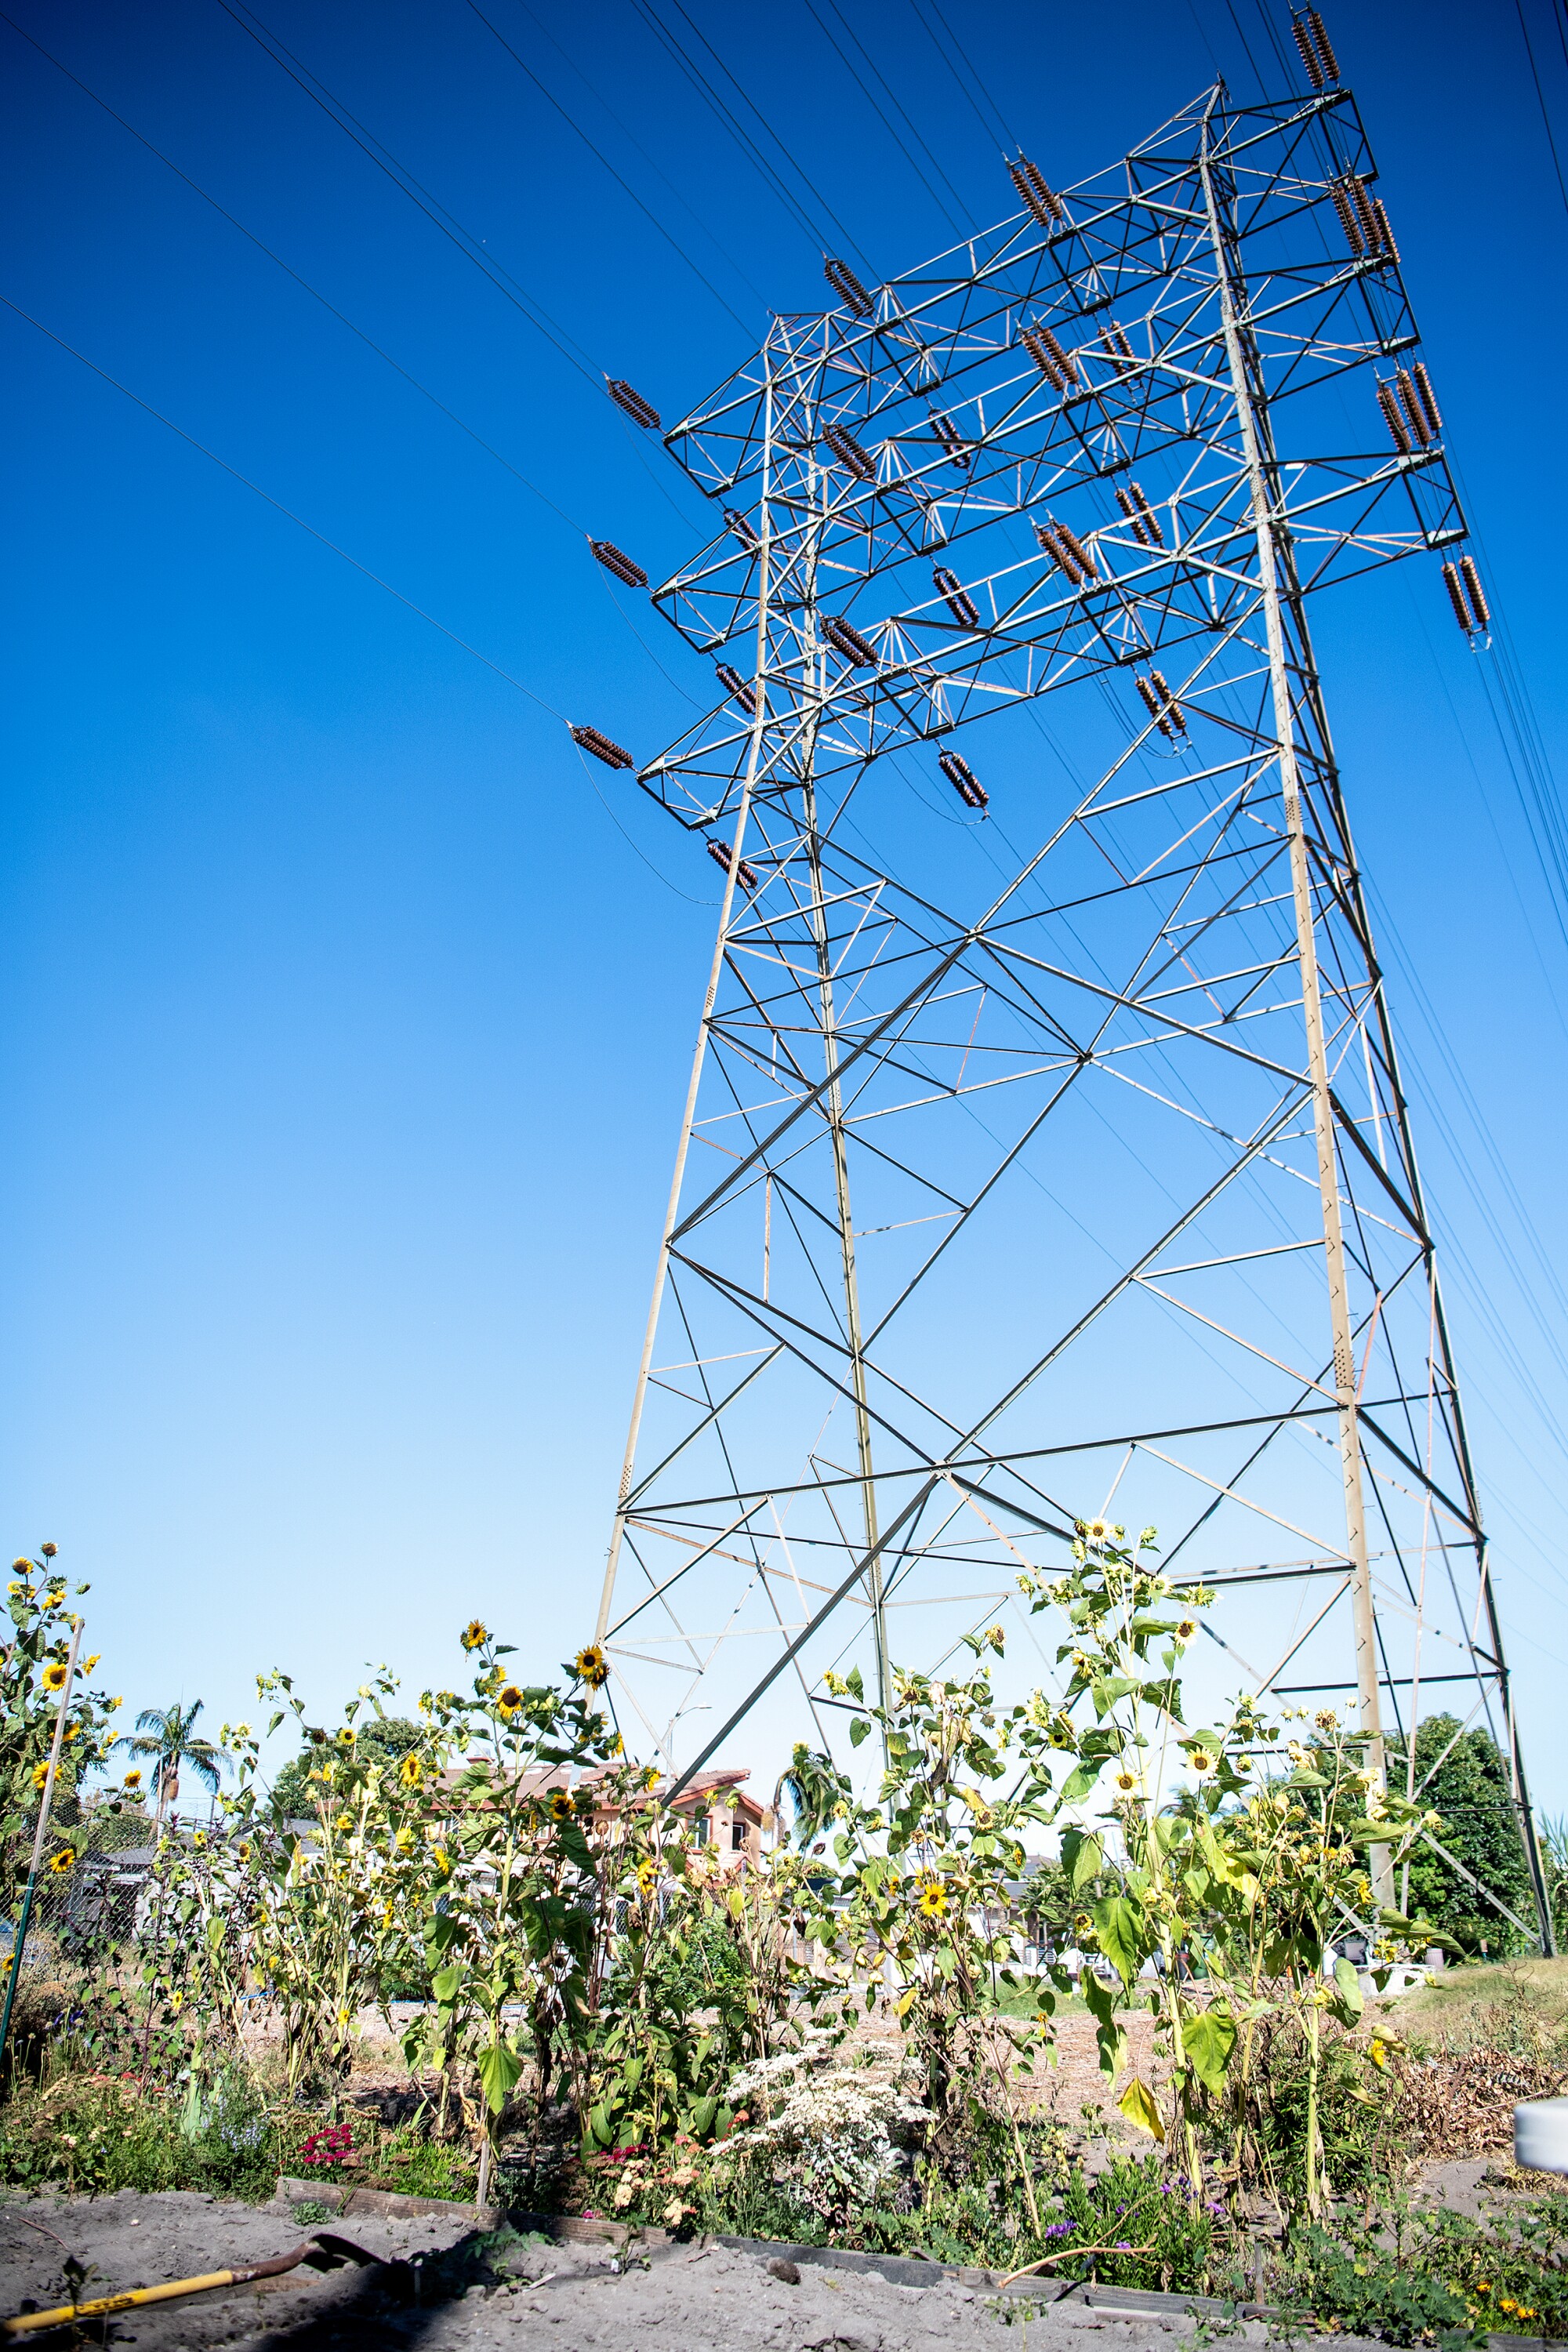 A garden lies at the base of a tall electrical tower.